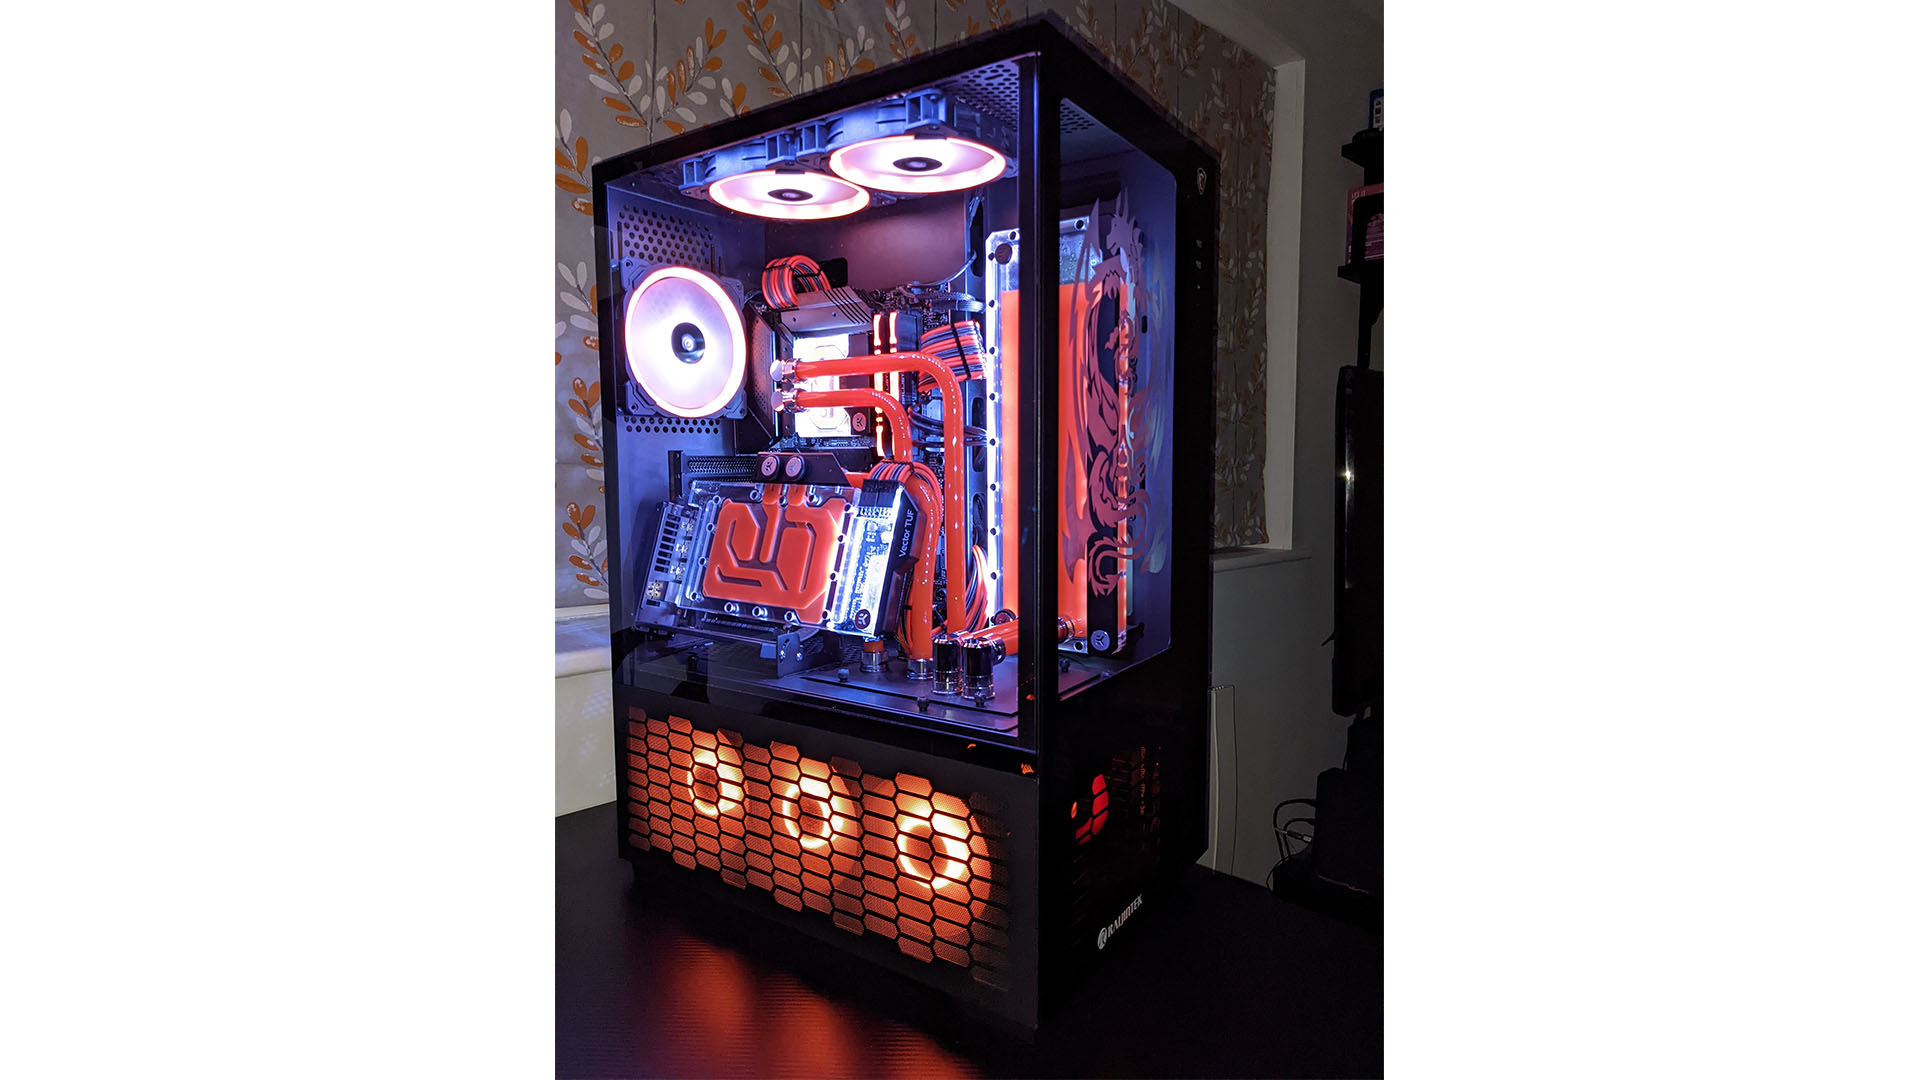 The gaming PC with red fans at the bottom and an angled graphics card